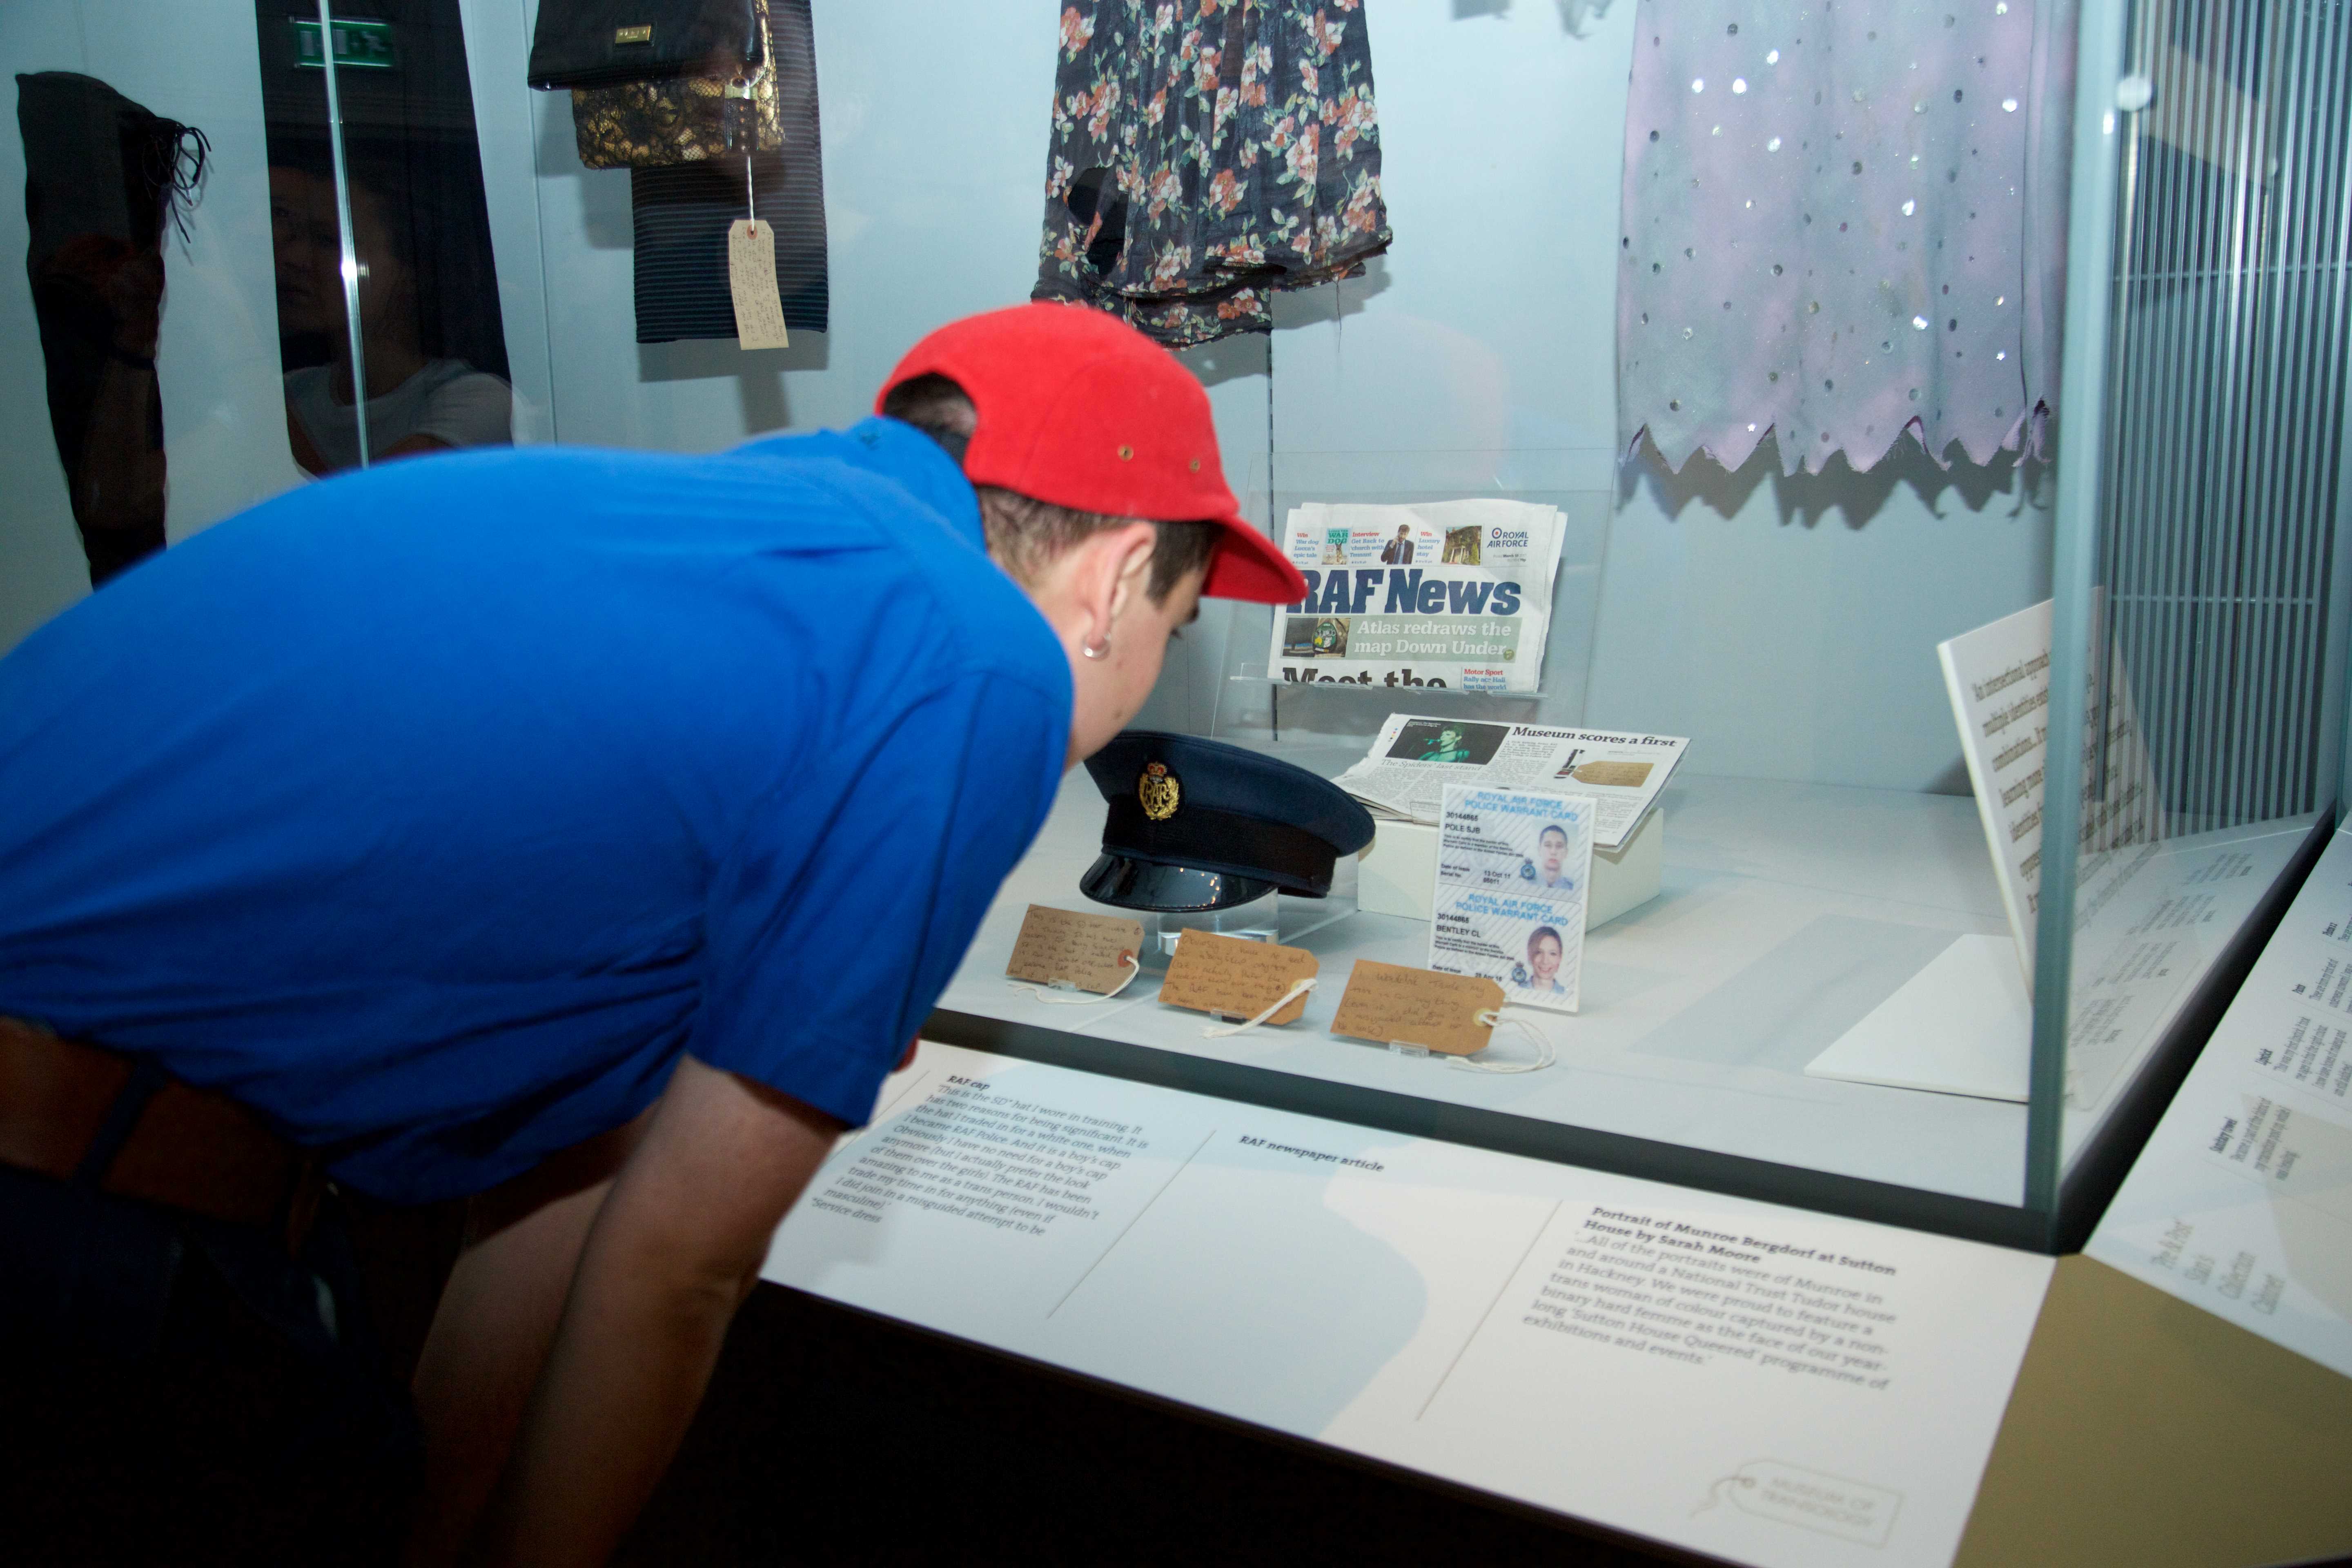  Person standing with their back to the photographer in blue shirt and red cap leans over to look at objects in a display case.